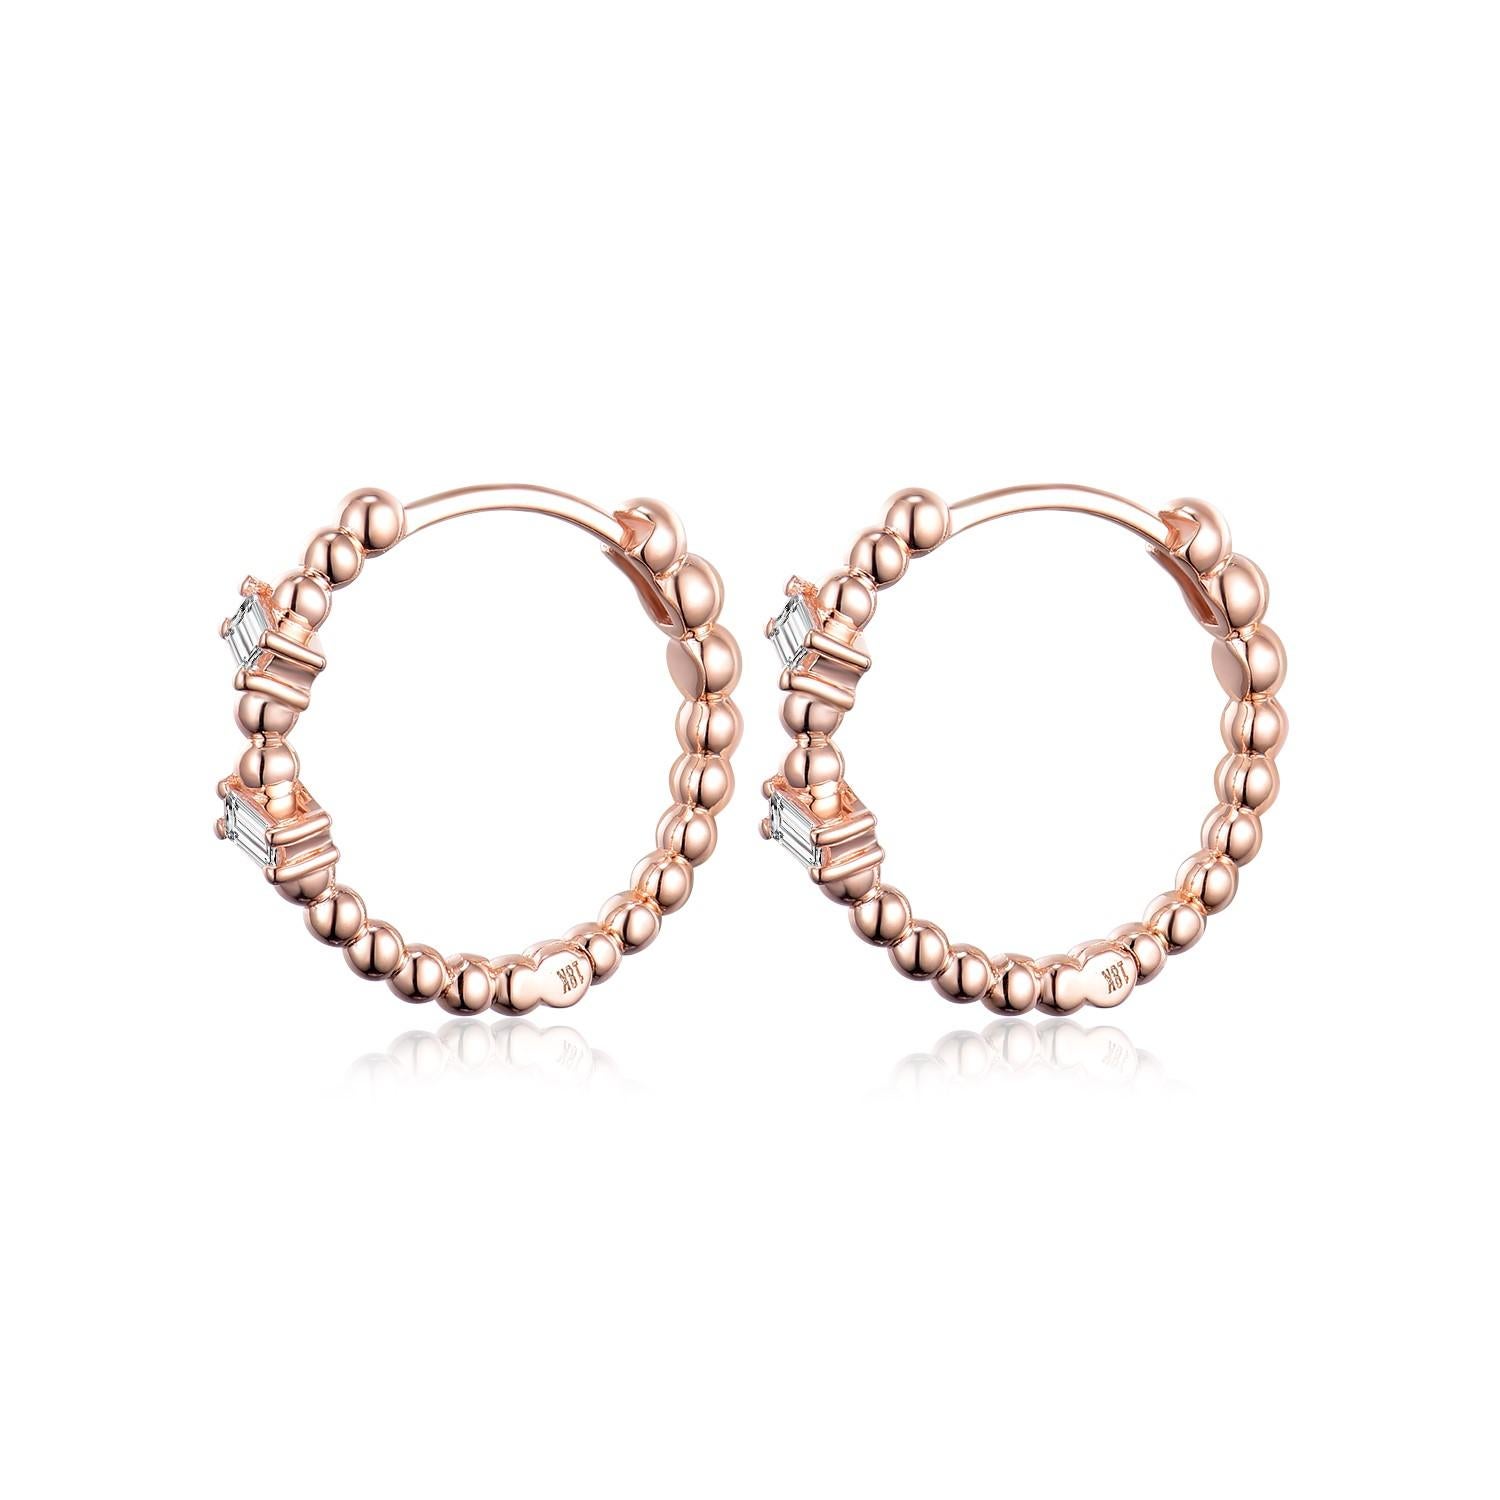 The Baguette Diamond Hoop Earrings in 18 Karat Rose Gold are a stylish and versatile pair of earrings that effortlessly combine elegance with everyday wearability. Crafted with care, these hoop earrings feature a unique design with bead accents and